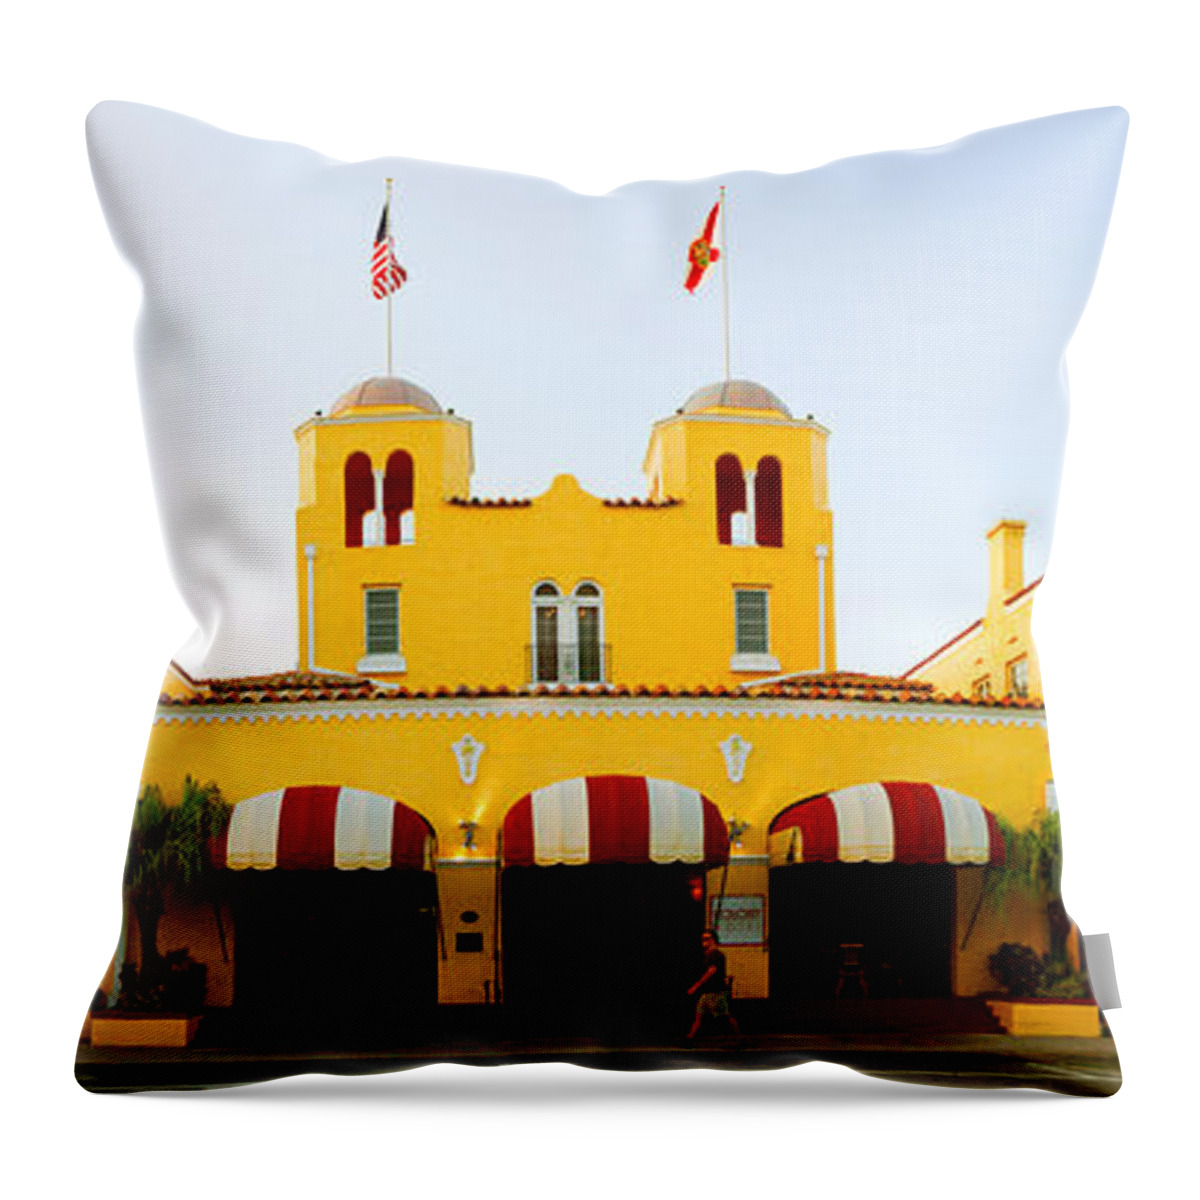 Photography Throw Pillow featuring the photograph Facade Of A Hotel, Colony Hotel, Delray by Panoramic Images